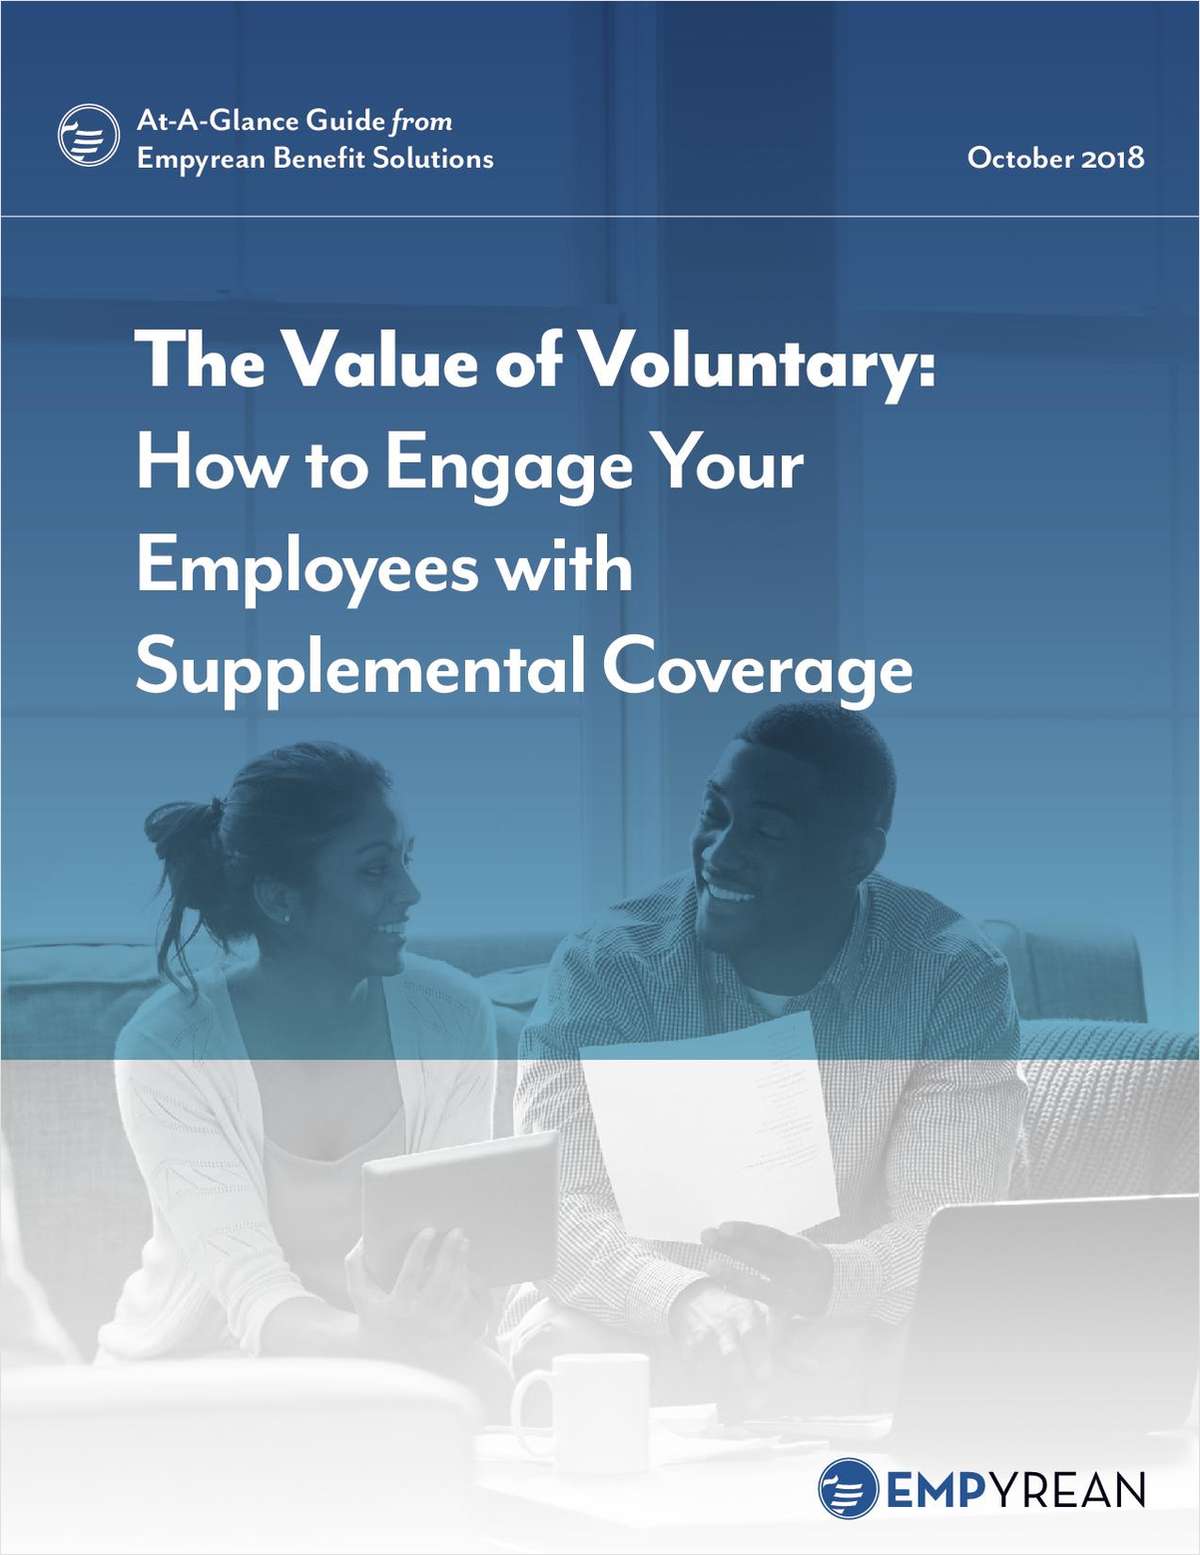 The Value of Voluntary: How to Engage Your Employees with Supplemental Coverage